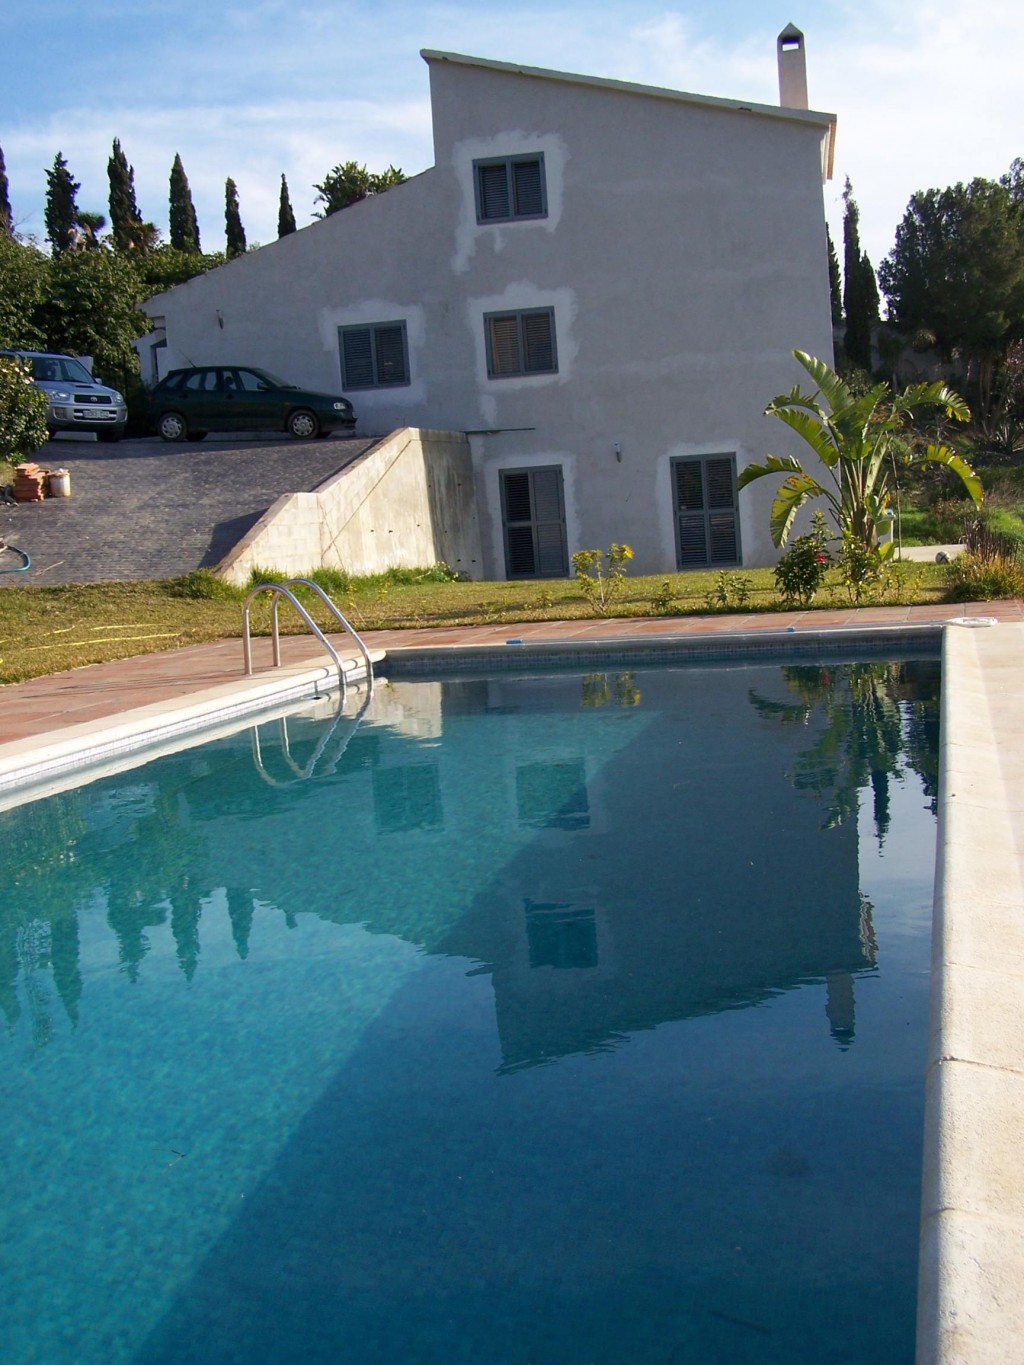 Pool with house